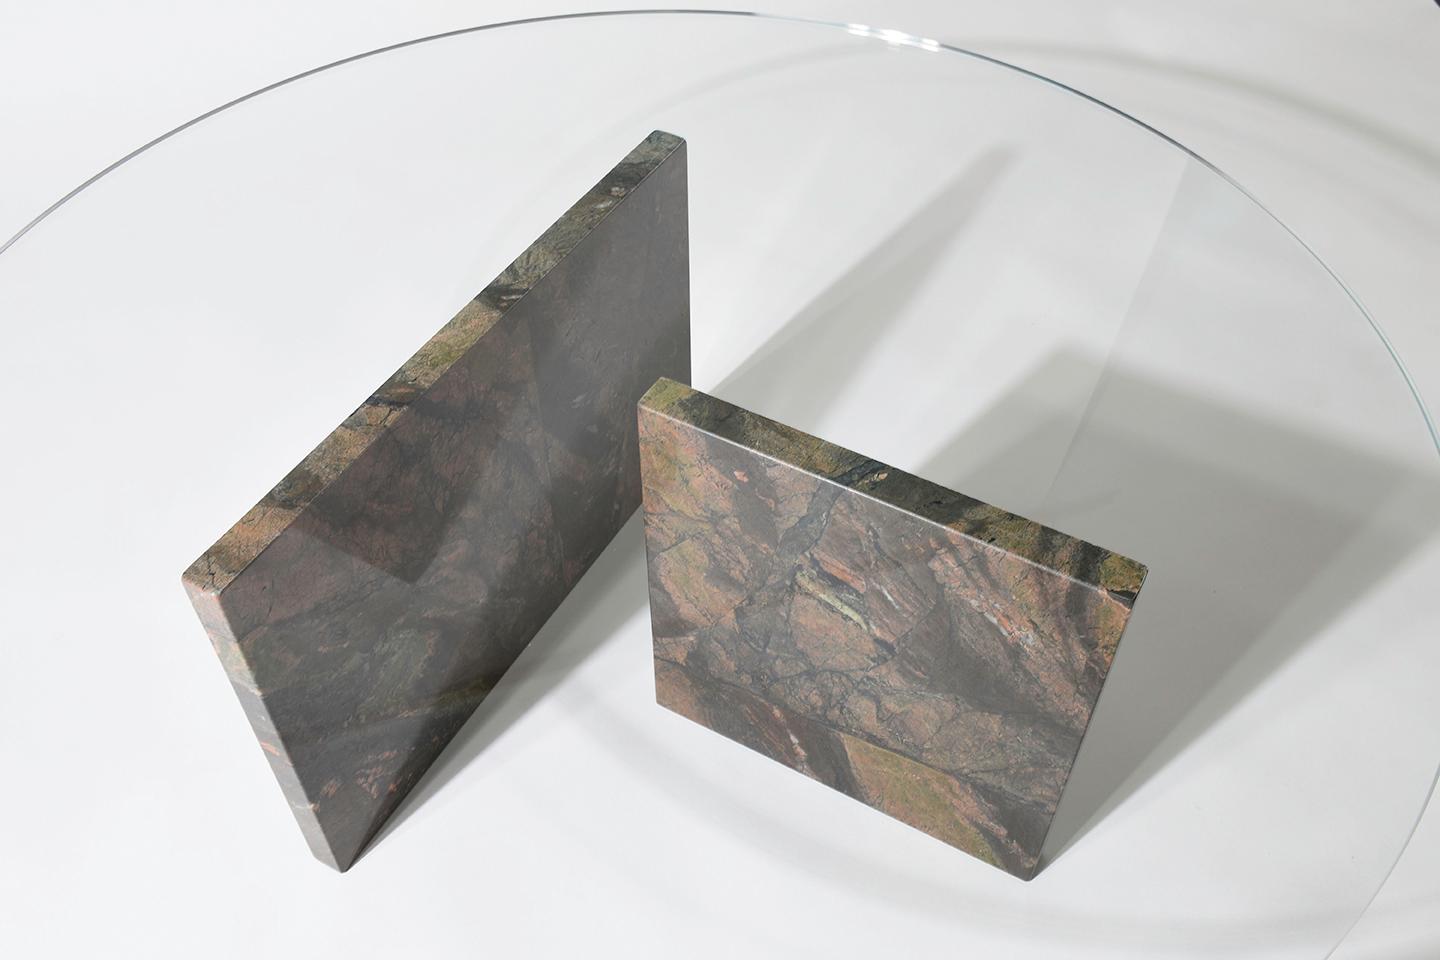 The two freestanding marble legs, seemingly precariously balanced beneath the floating plane of glass create an almost magical feel for this coffee table as there seems to be no logical explanation for why it does not collapse. Available in both